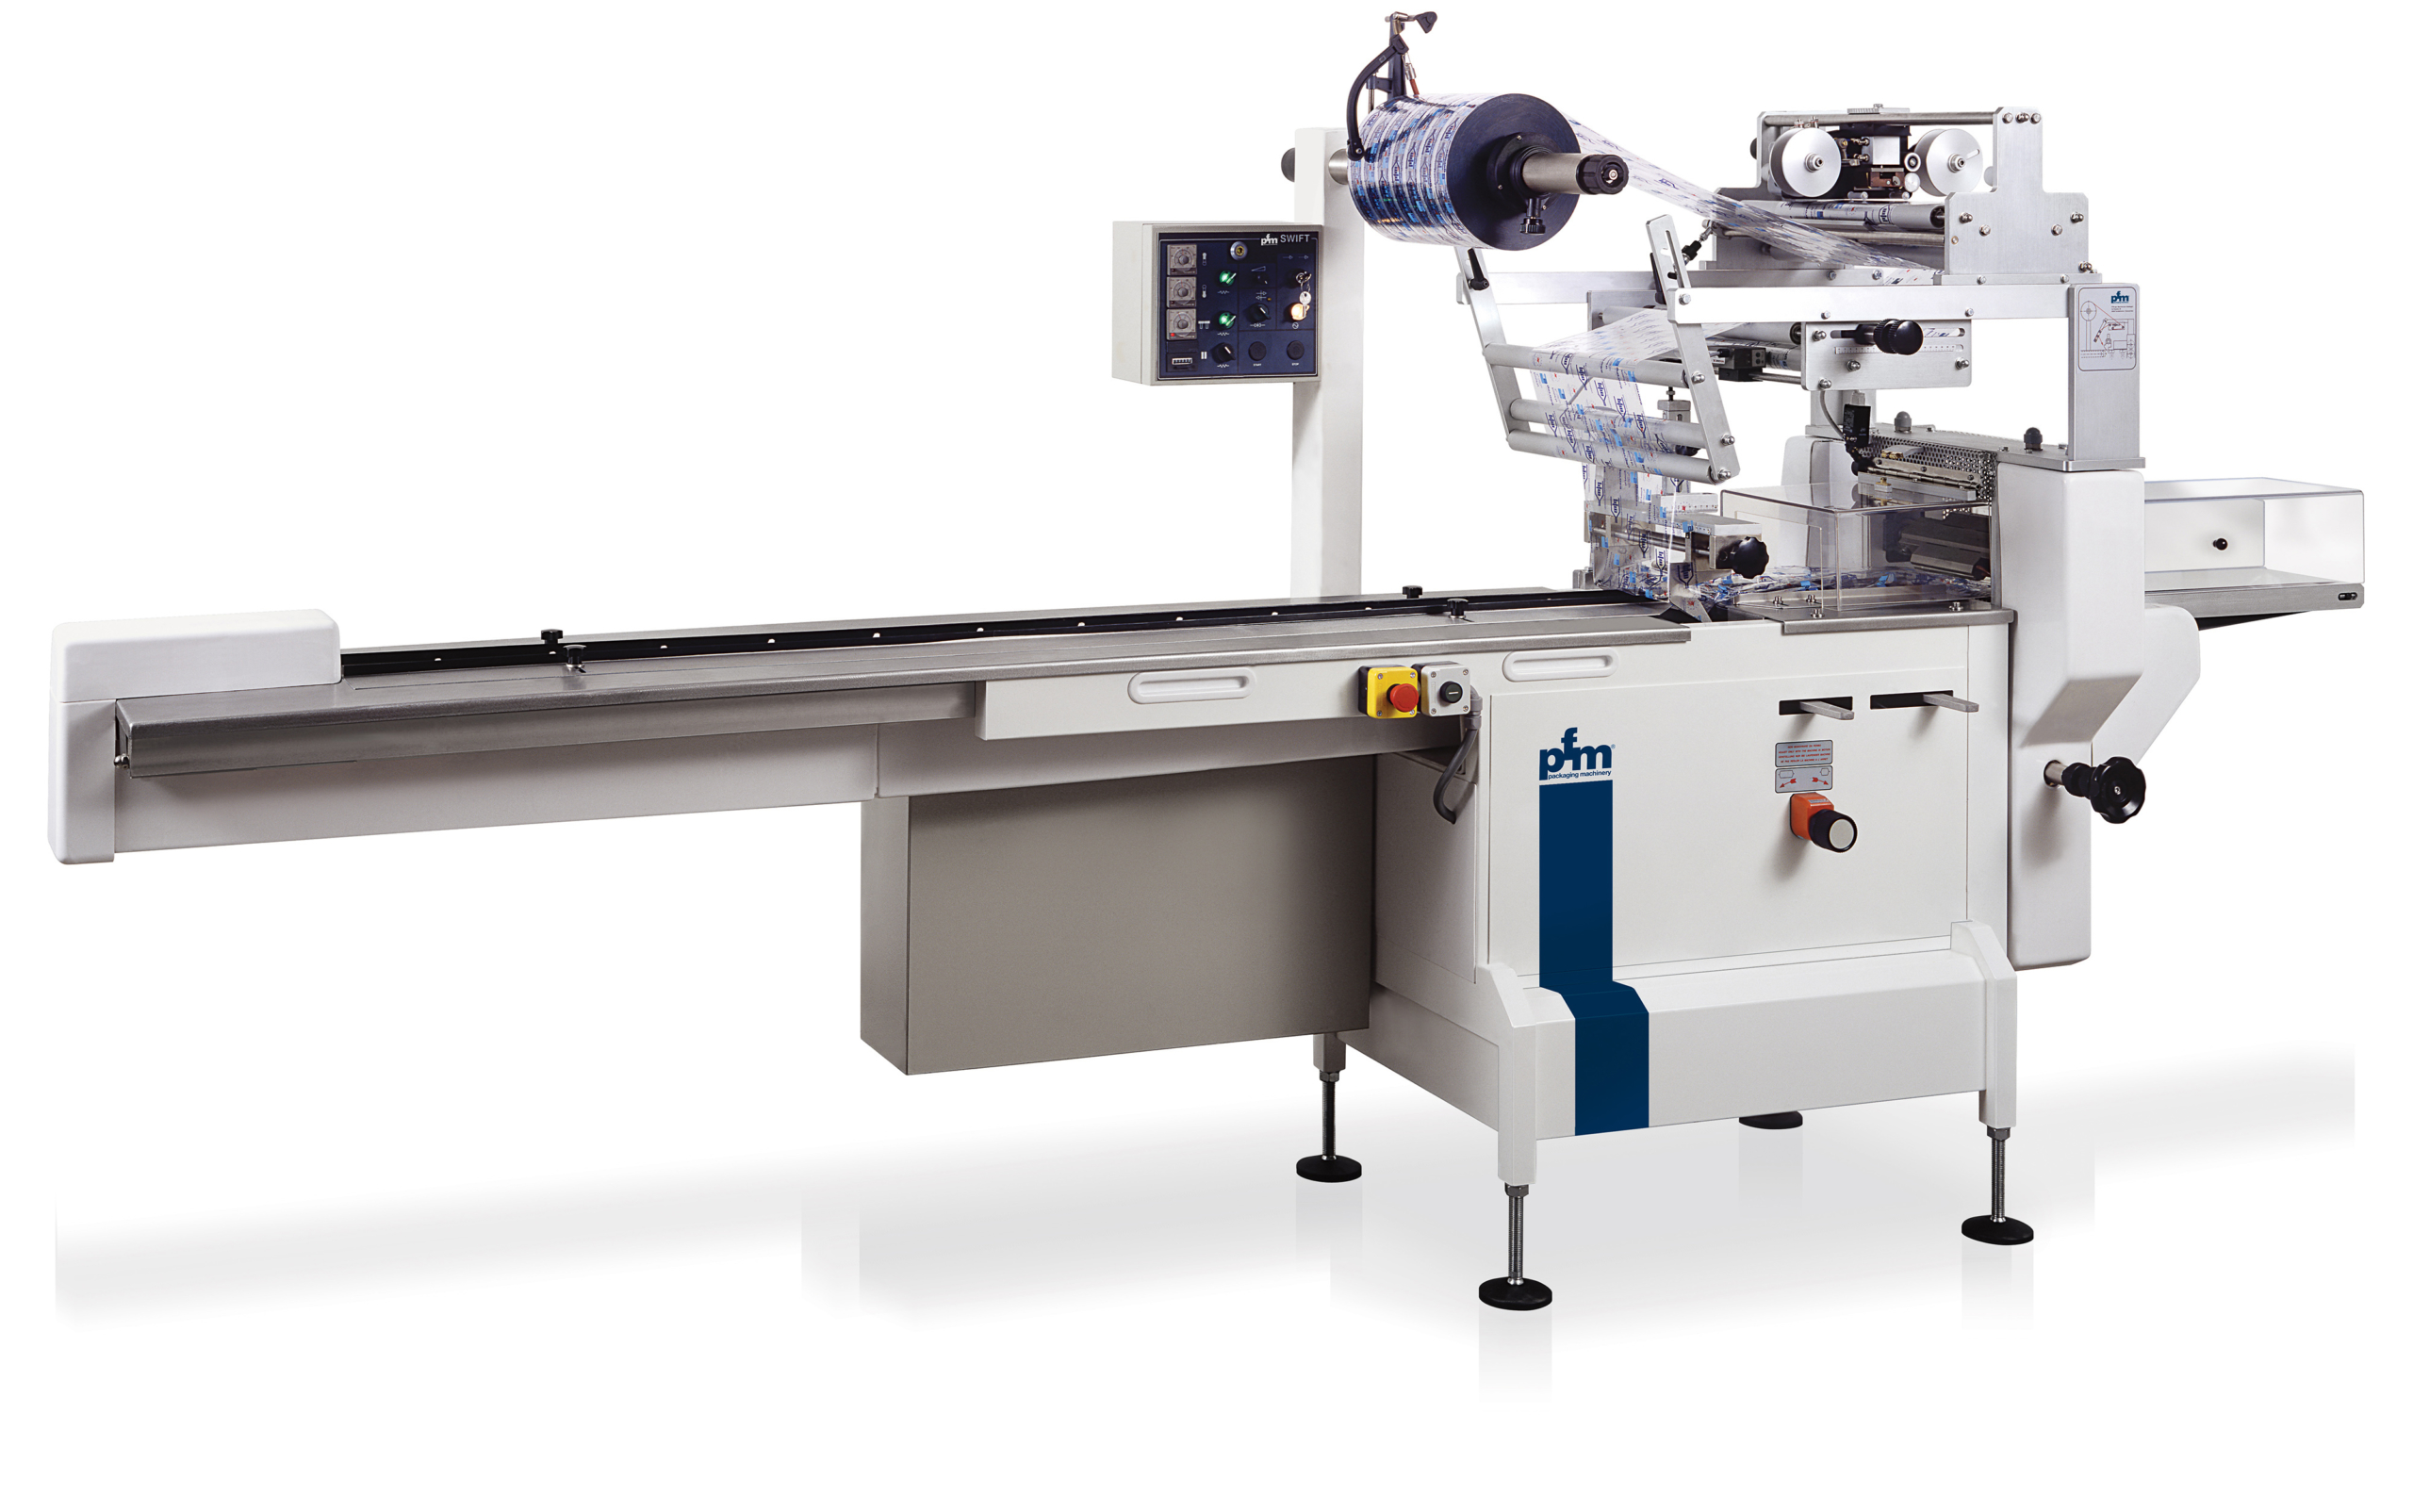 Horizontal flow-wrap machine with rotary crimp jaws, designed to wrap at speeds of up to 100 bags per minute